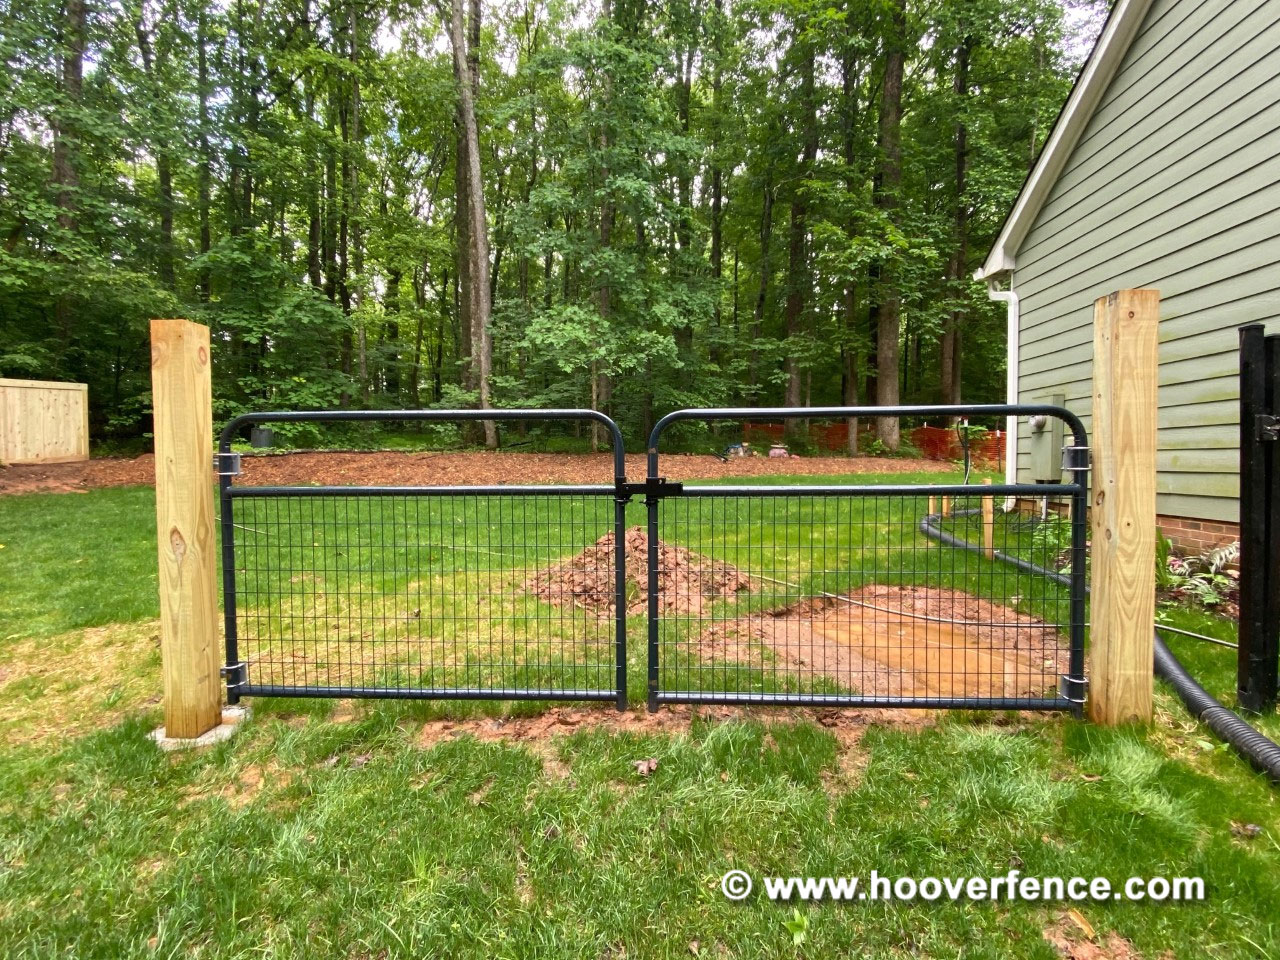 Customer Install - Double Wire Filled Tube Gates Installed with CL-CDL-BK Double Gate Latch - Youngsville, NC